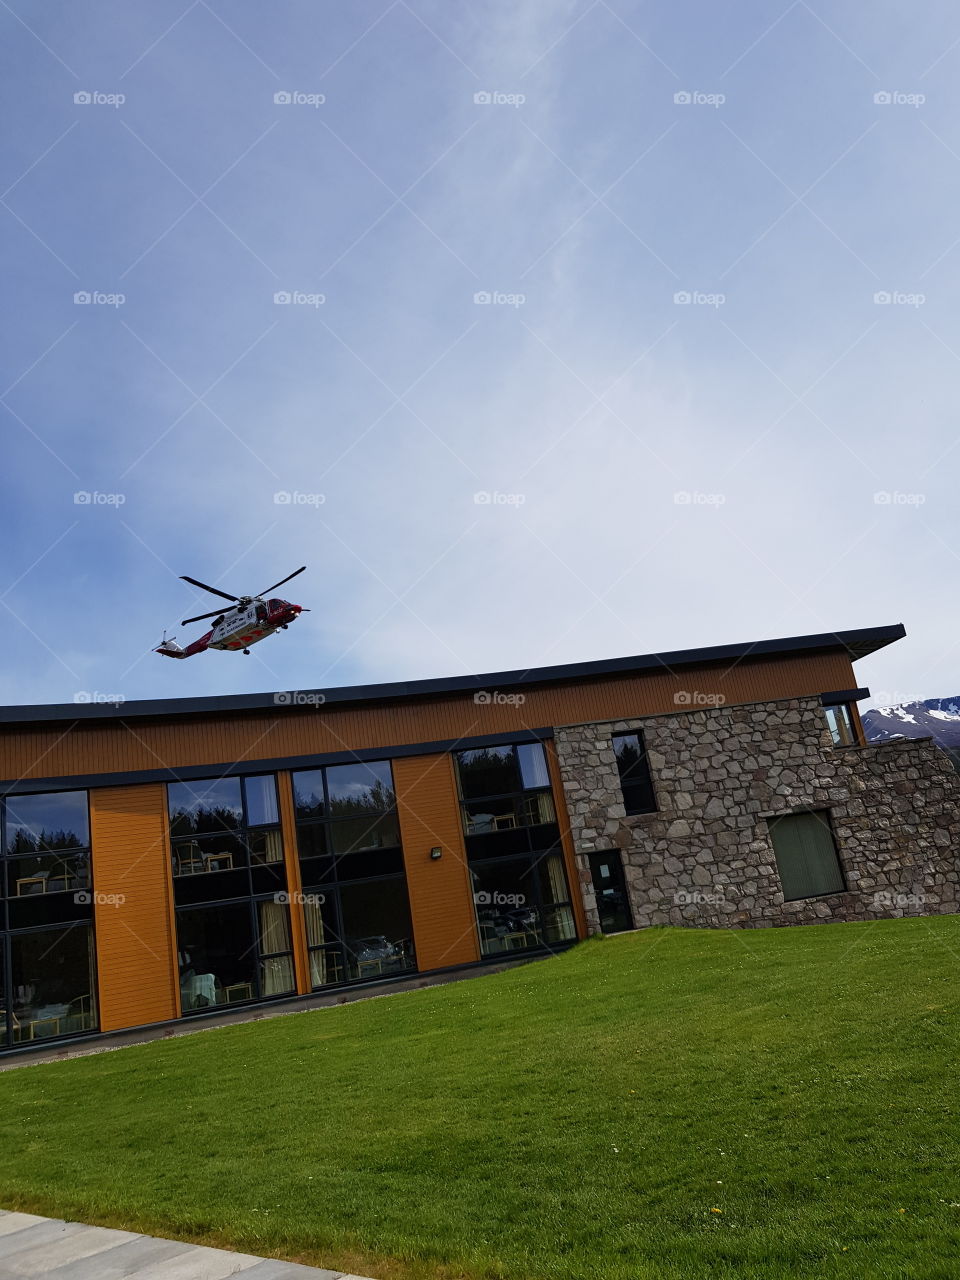 Rescue helicopter coming into land over brightly coloured building.